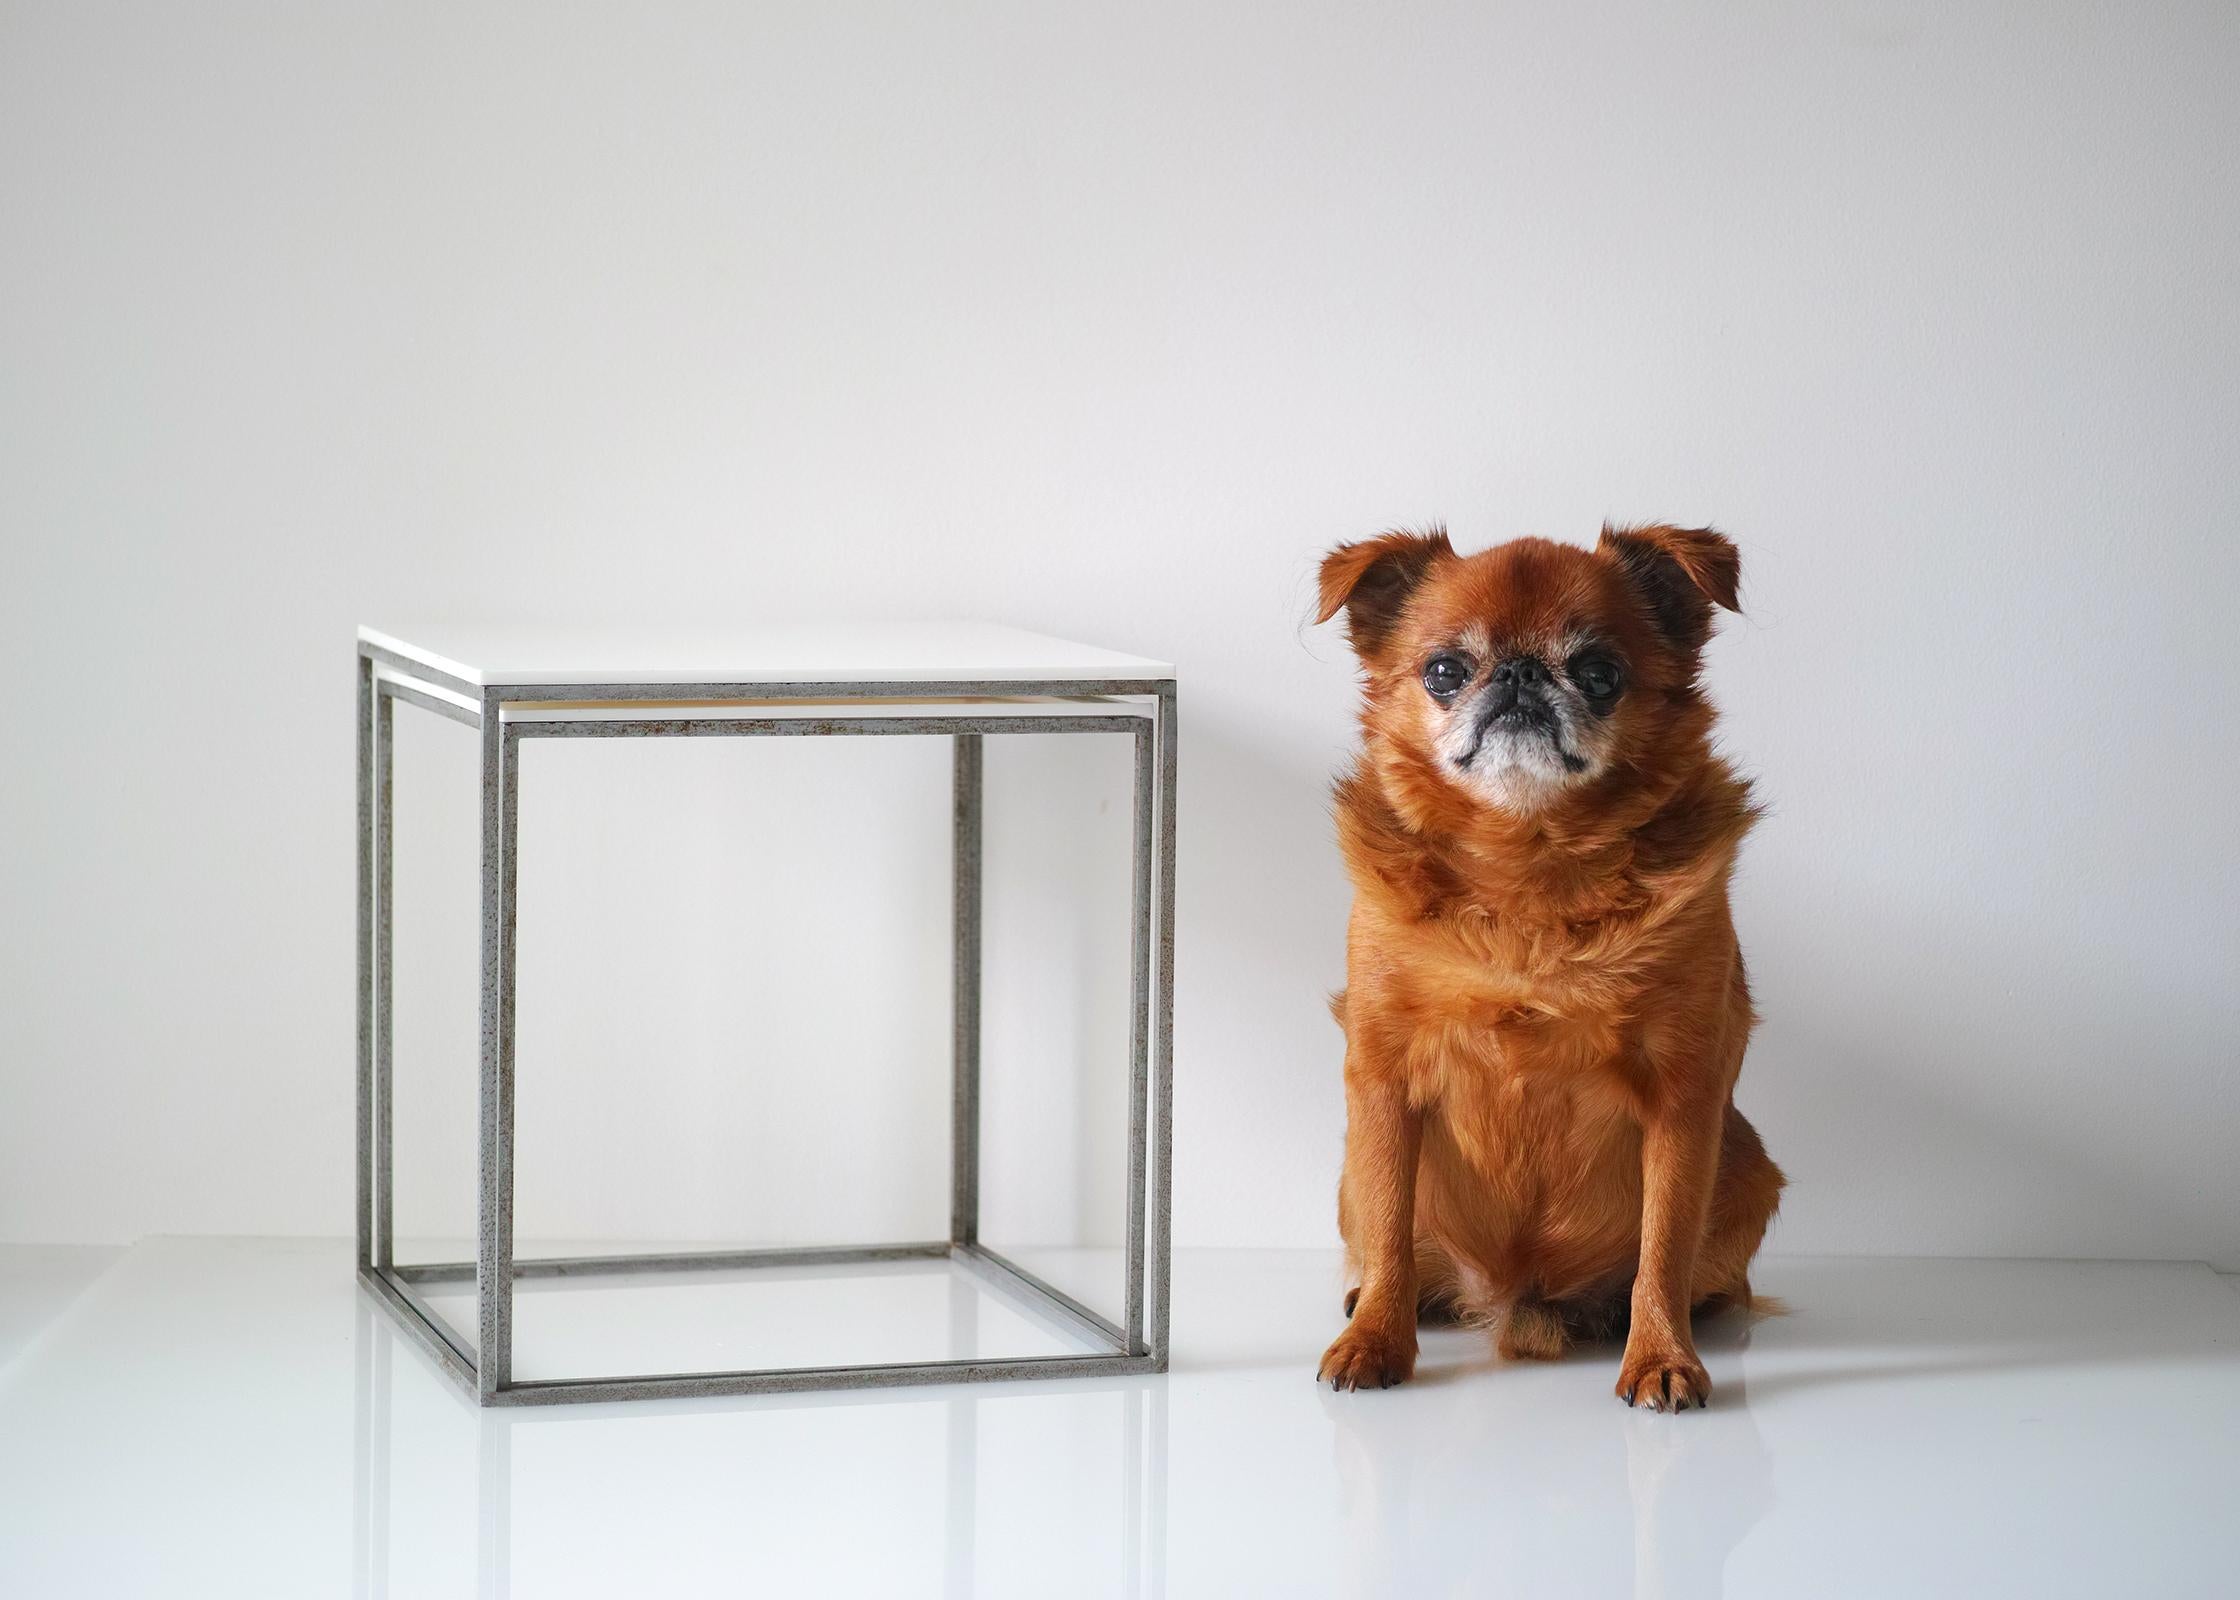 For your consideration is this pair of Poul Kjærholm PK-71 Cube Nesting Tables dating from the 1960s. They feature elegantly slim metal frames with the original inset white acrylic tops. They are versatile small scale tables that function well on a